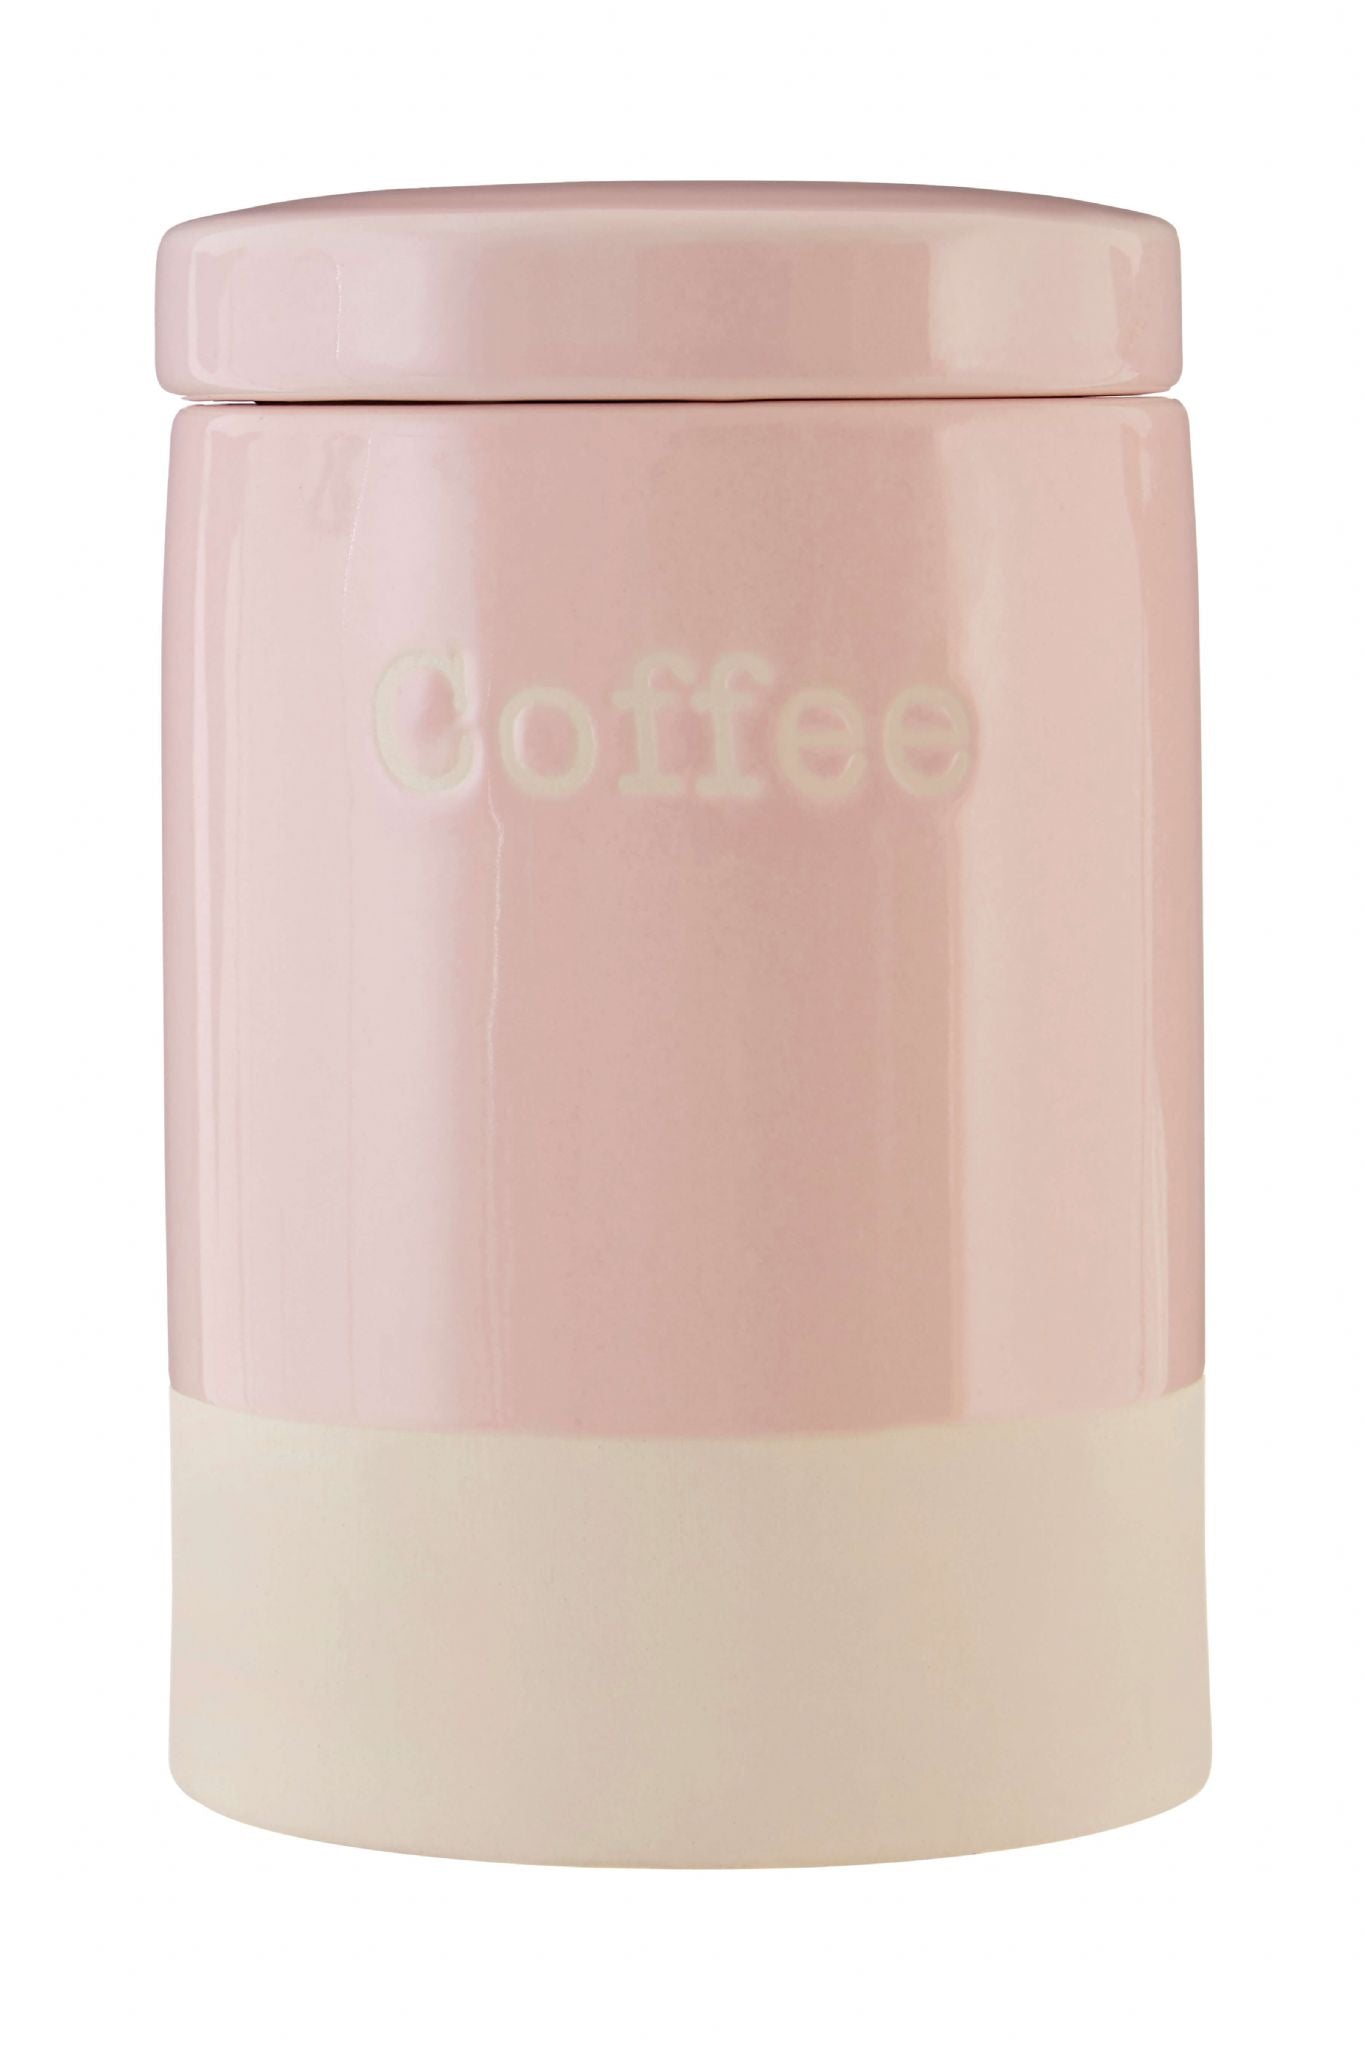 Pastel Pink Coffee Canister - Outlet - Save 20%